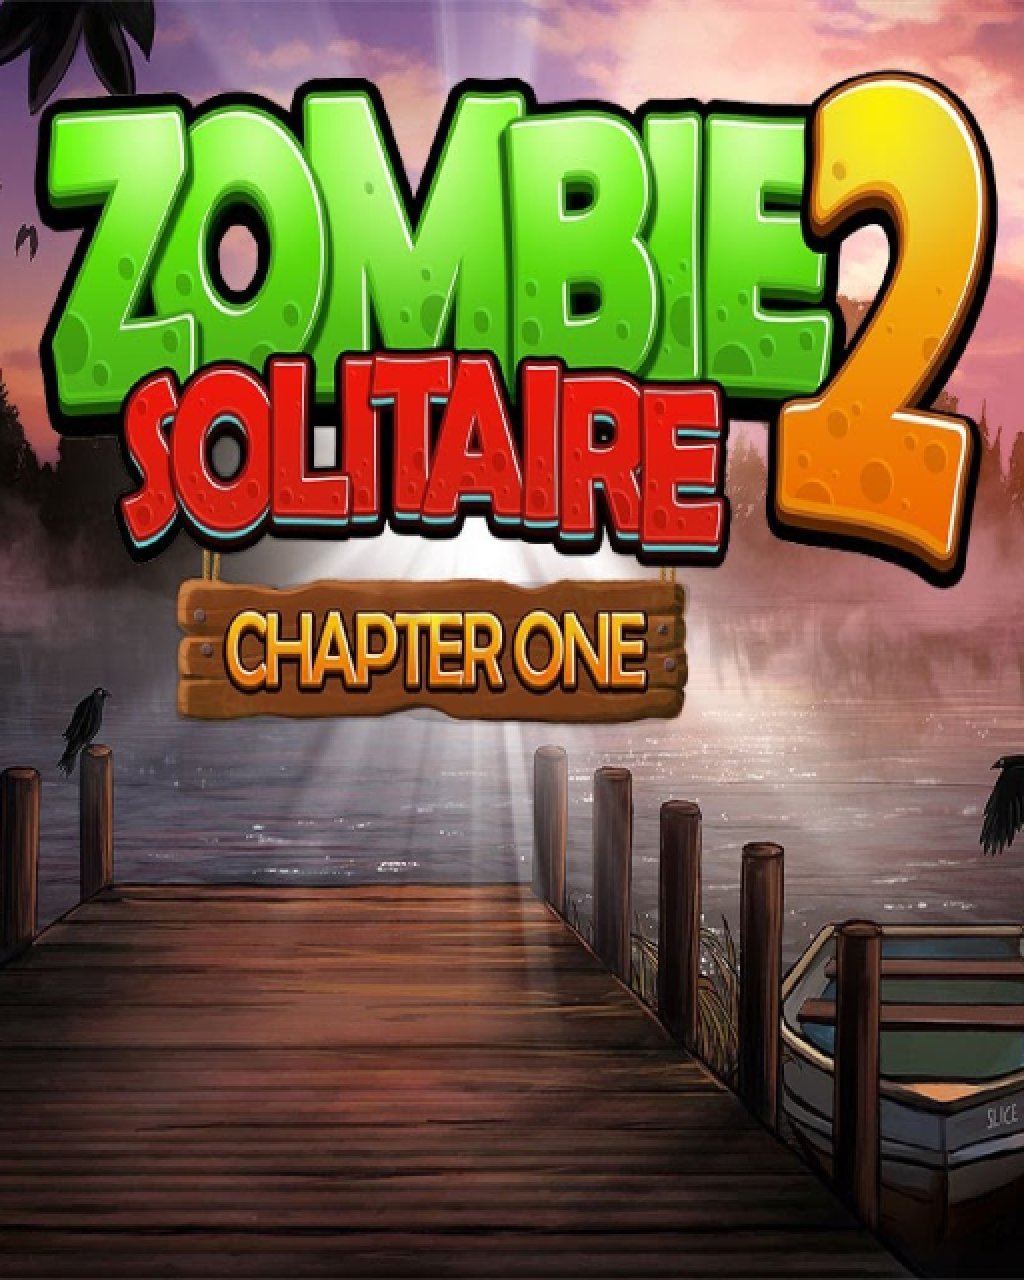 Zombie Solitaire 2 Chapter 1